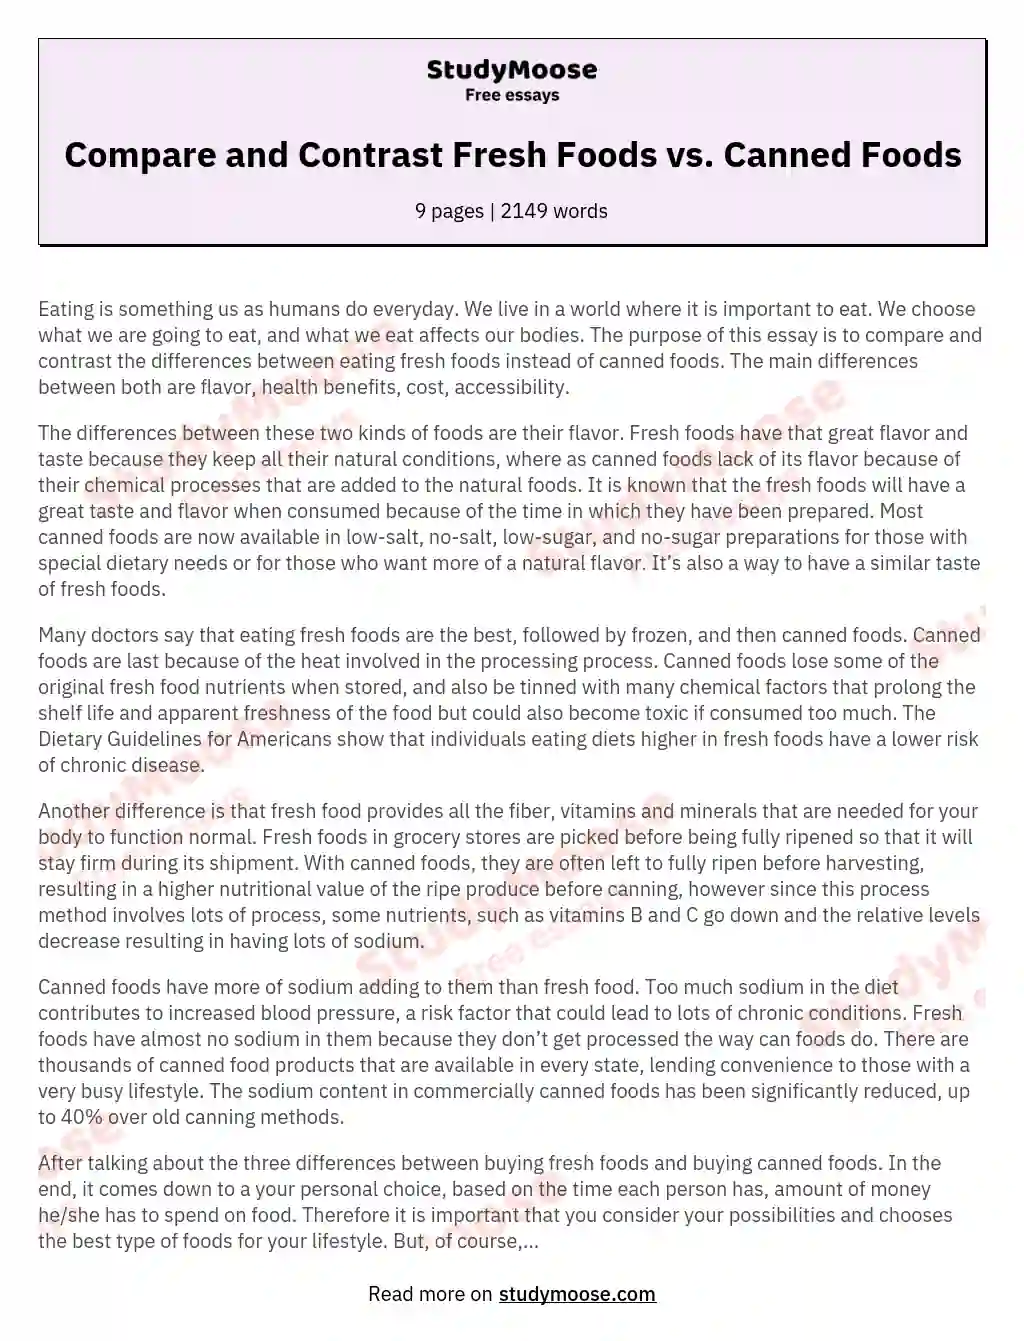 Compare and Contrast Fresh Foods vs. Canned Foods essay